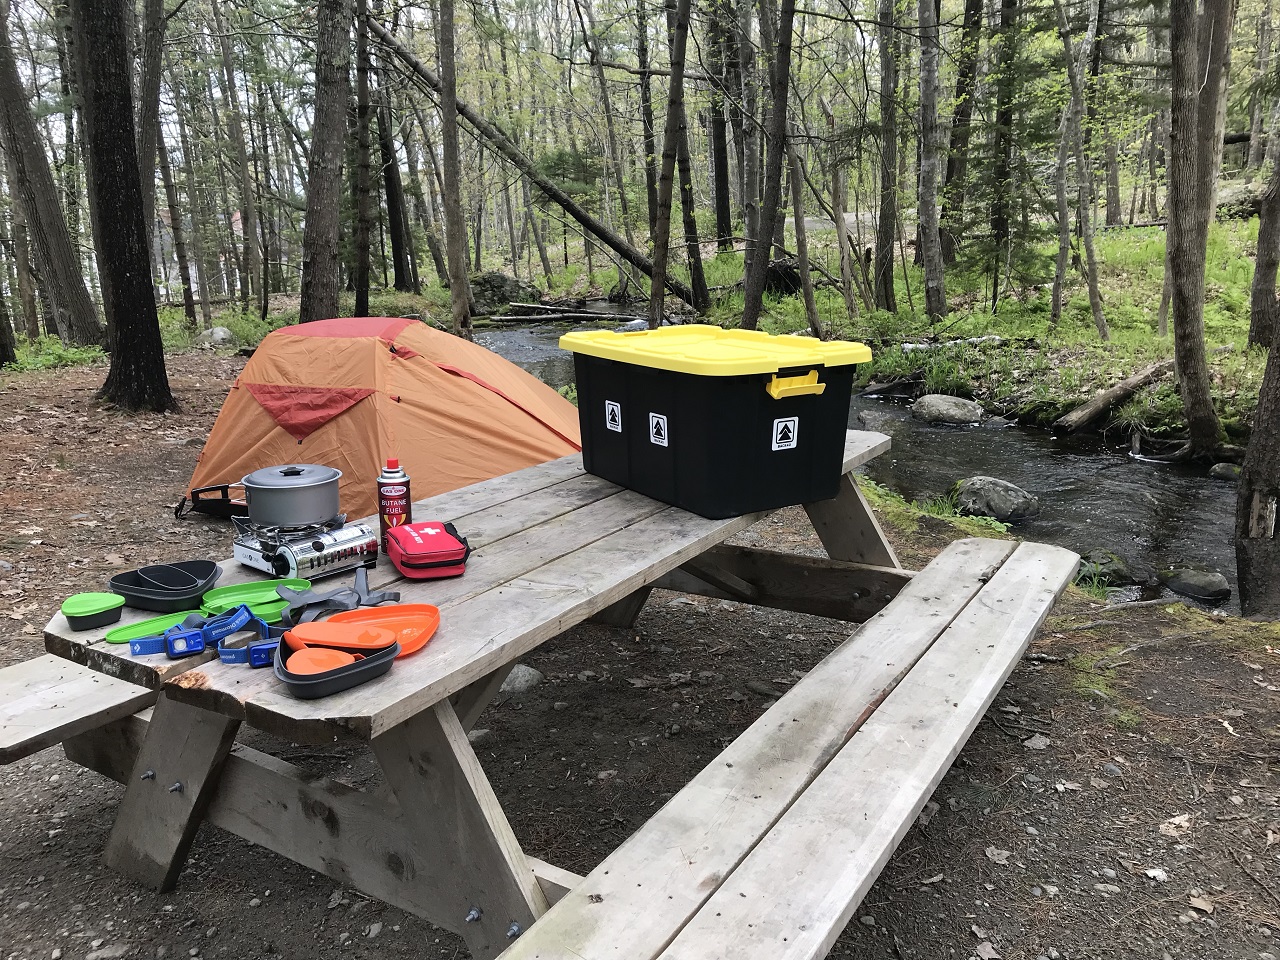 Two Maine outdoor recreation startups collaborate to get more Mainers outdoors